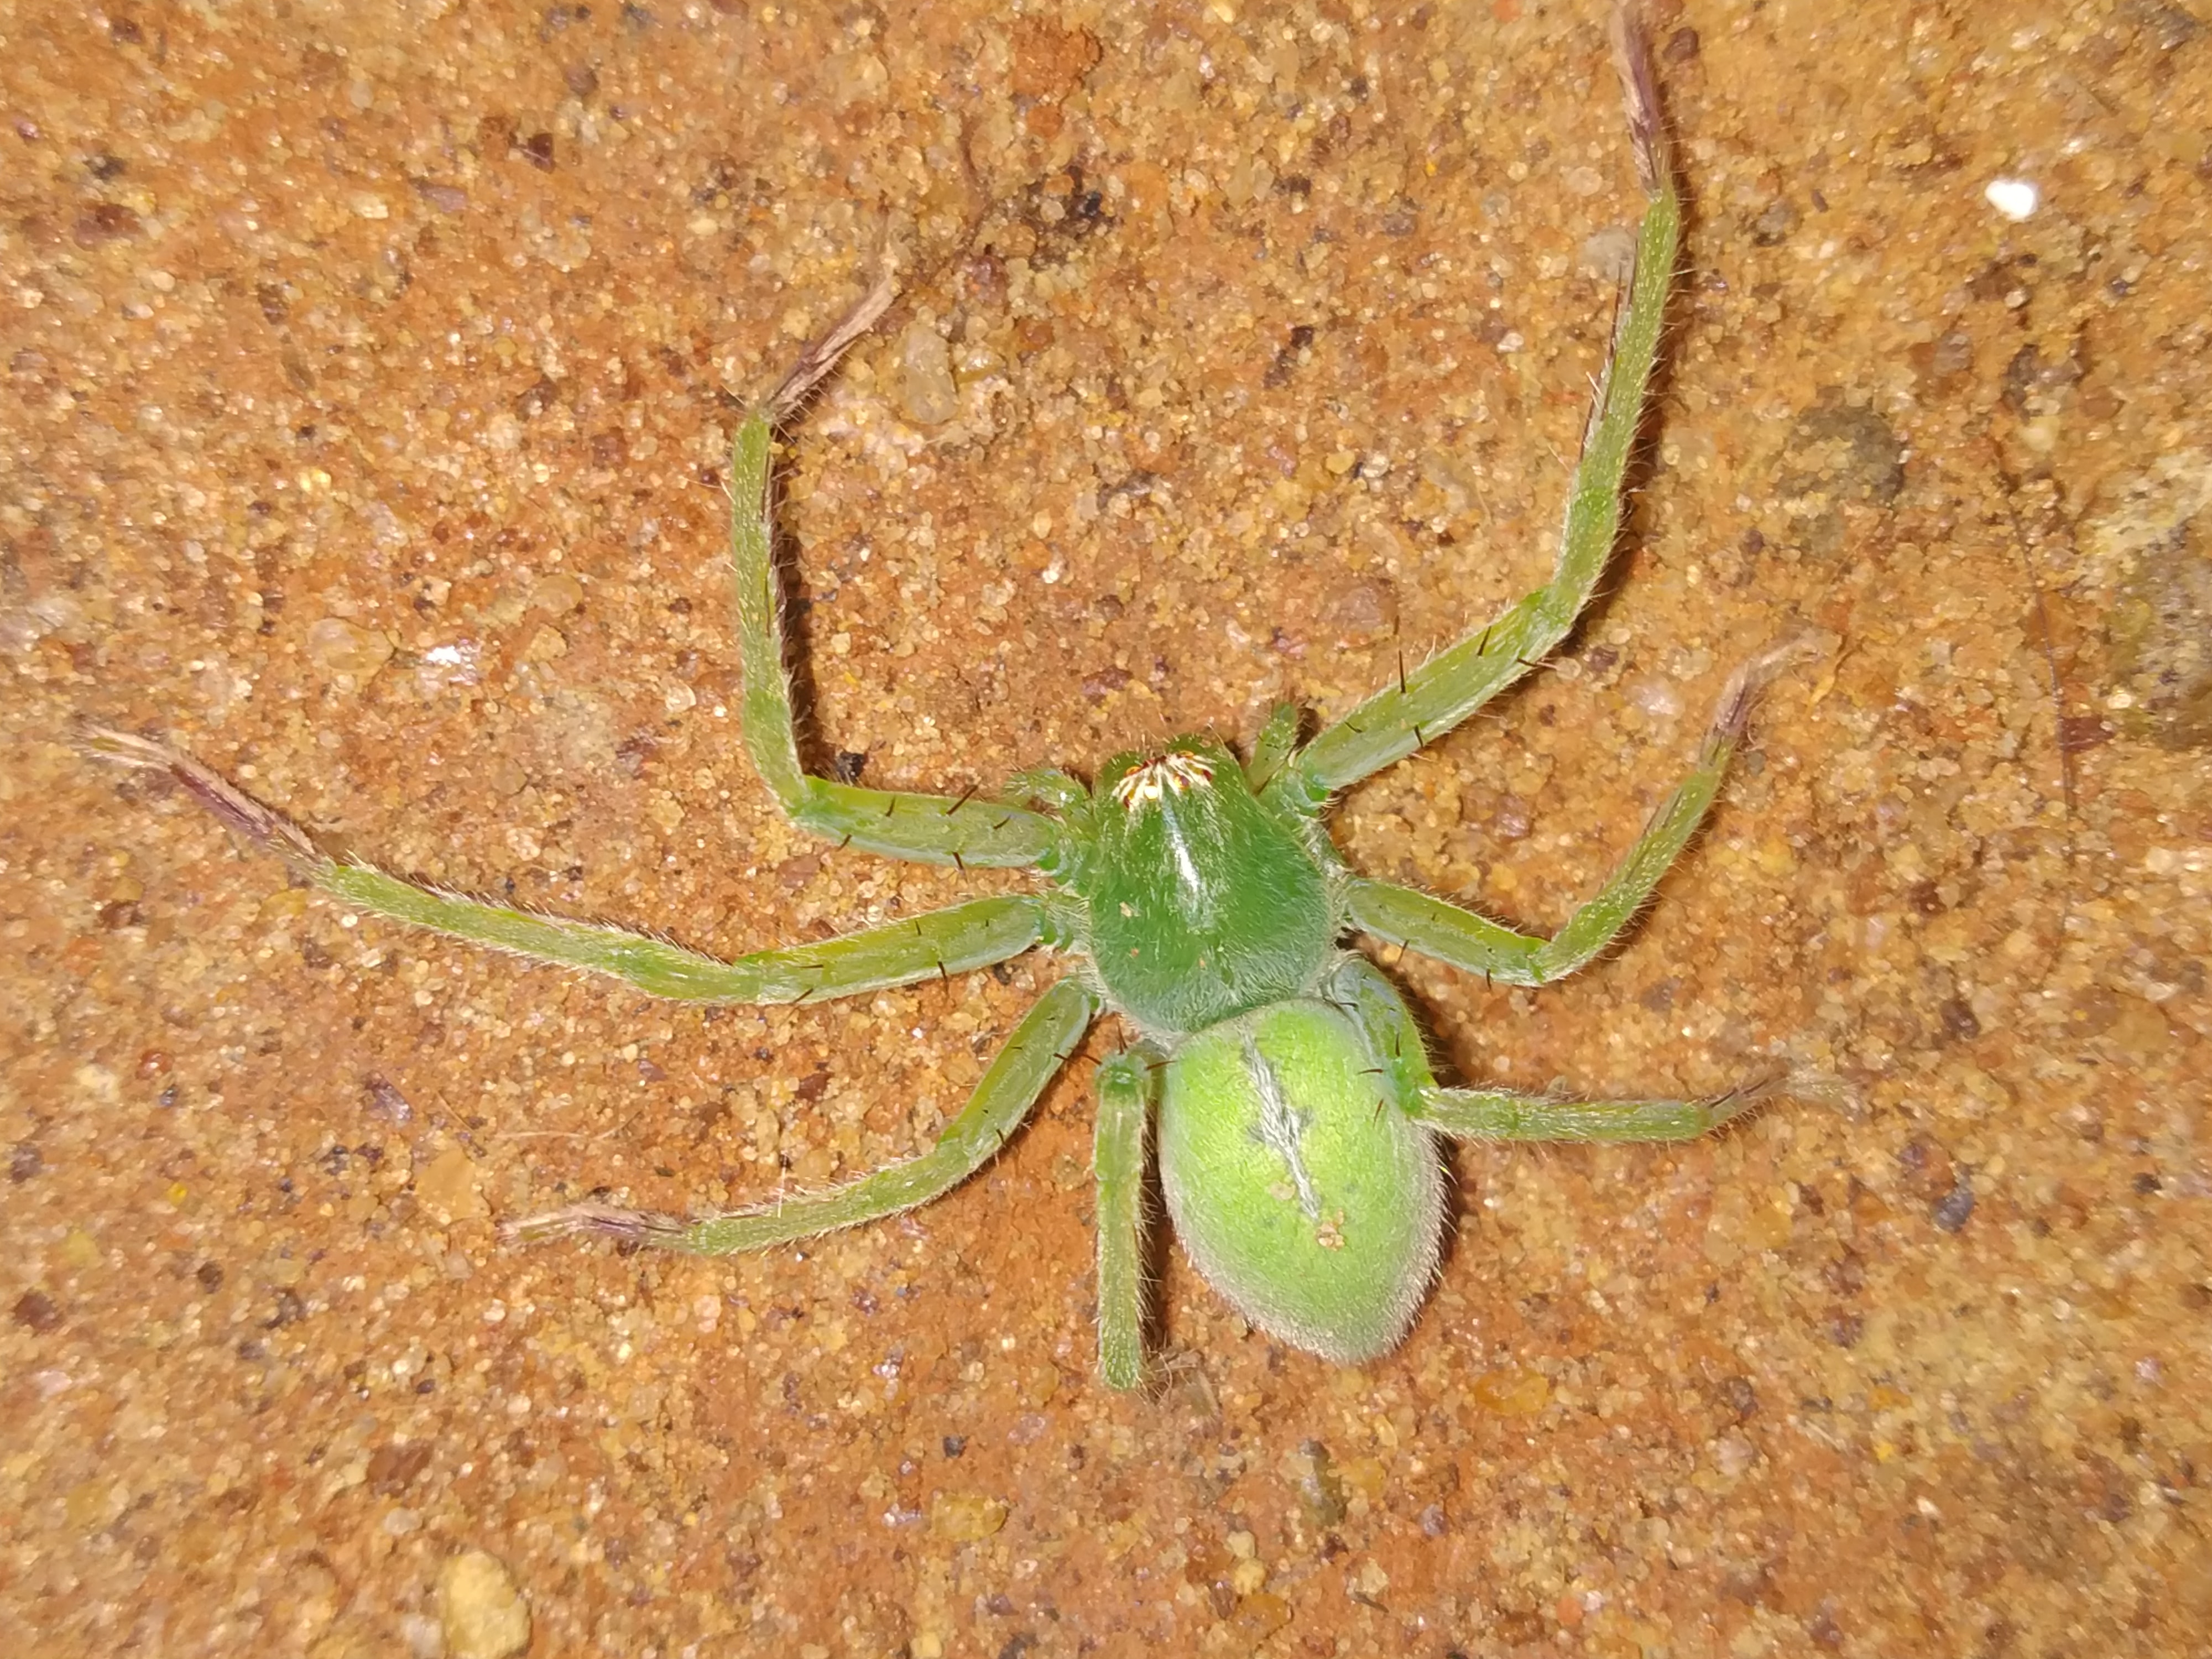 Picture of Olios milleti (Green Crab Spider) - Dorsal